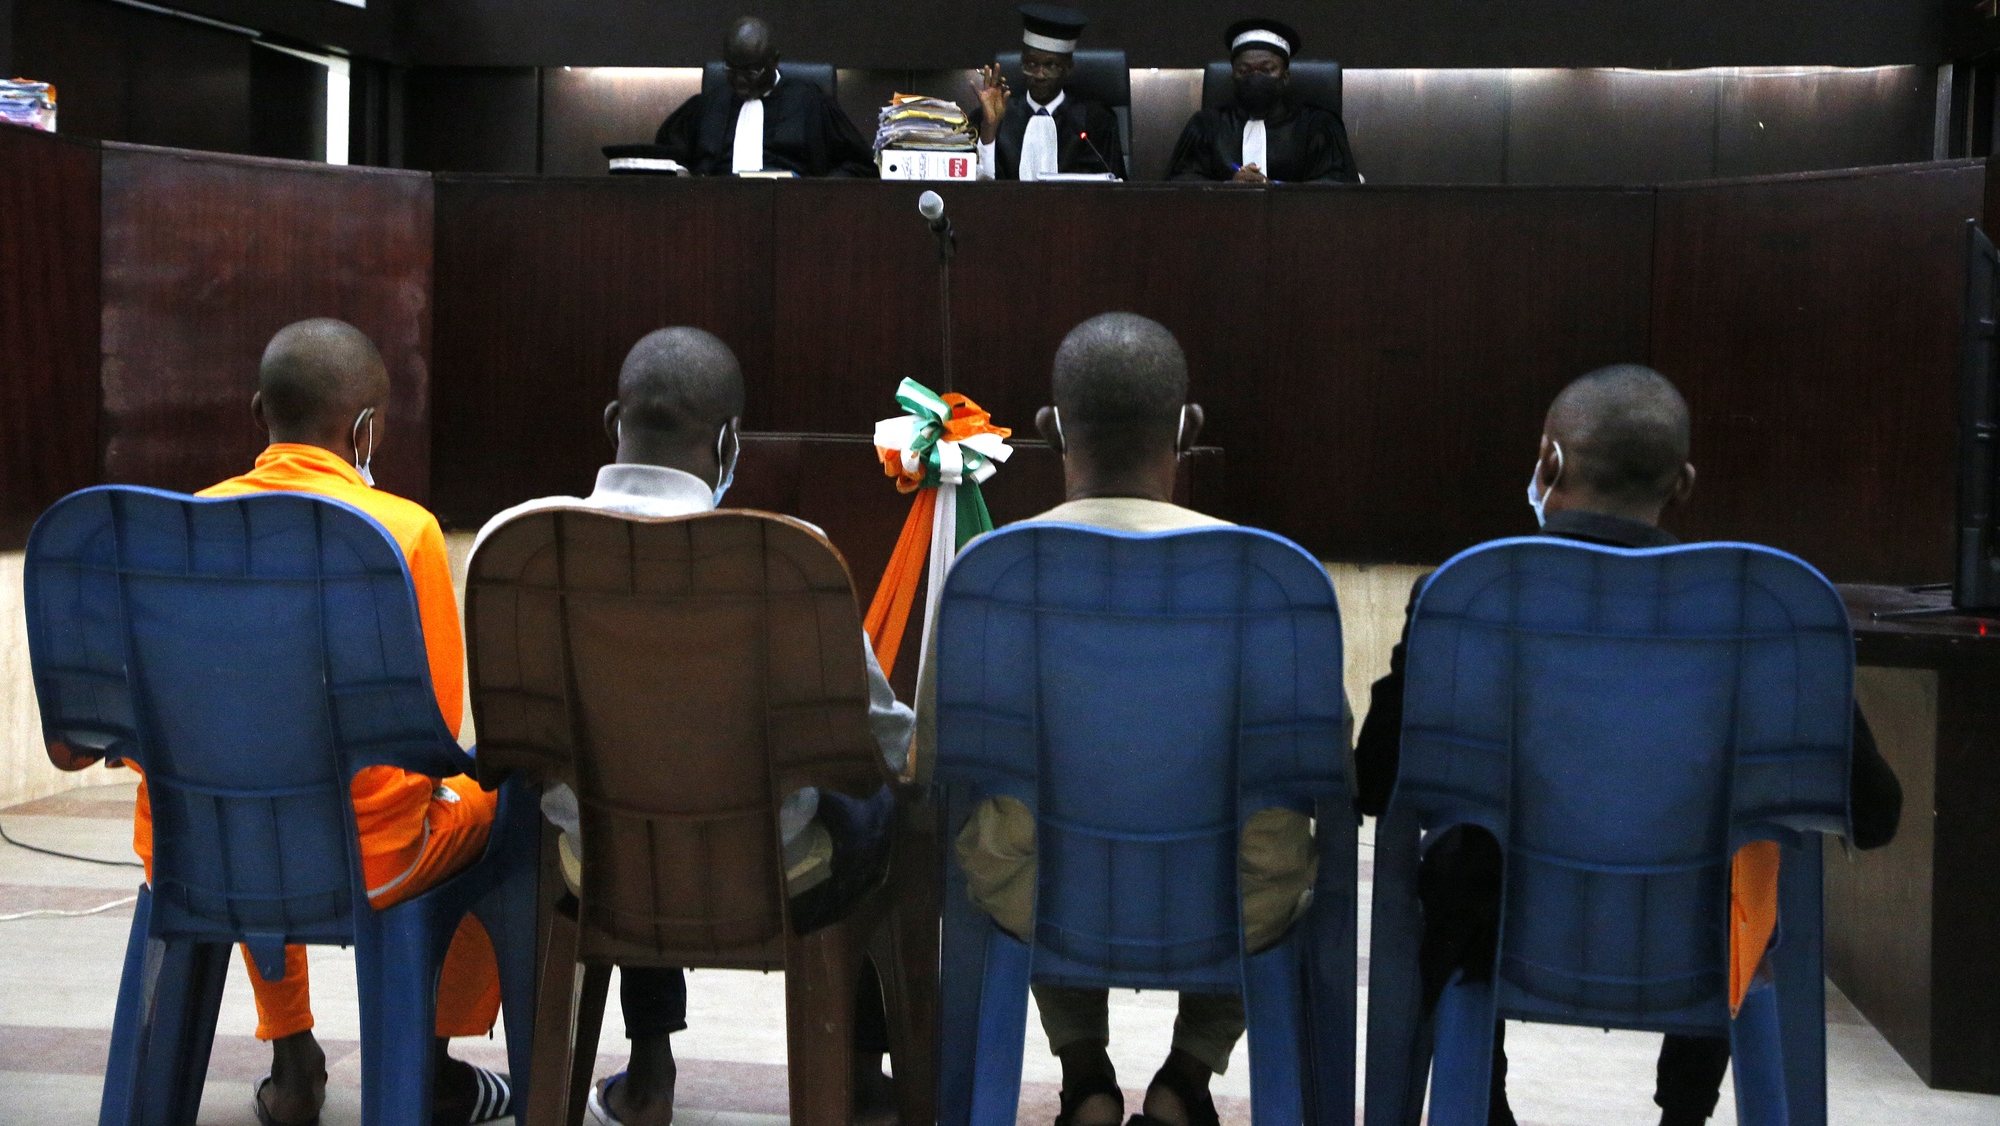 epa10376622 Defendants suspected of the Grand Bassam terrorist attack attend the final verdict of their trial at the Court of Justice in Abidjan, Ivory Coast, 22 December 2022. A small group of armed men attacked the resort town of Grand -Bassam on 13 March 2016, killing at least 19 people and injuring 33 others. The attack was claimed by Al-Qaeda in the Islamic Maghreb. Life imprisonment was requested by the prosecution on 21 December 2022 in Abidjan against four defendants. The final verdict will be pronounced on 28 December 2022.  EPA/LEGNAN KOULA